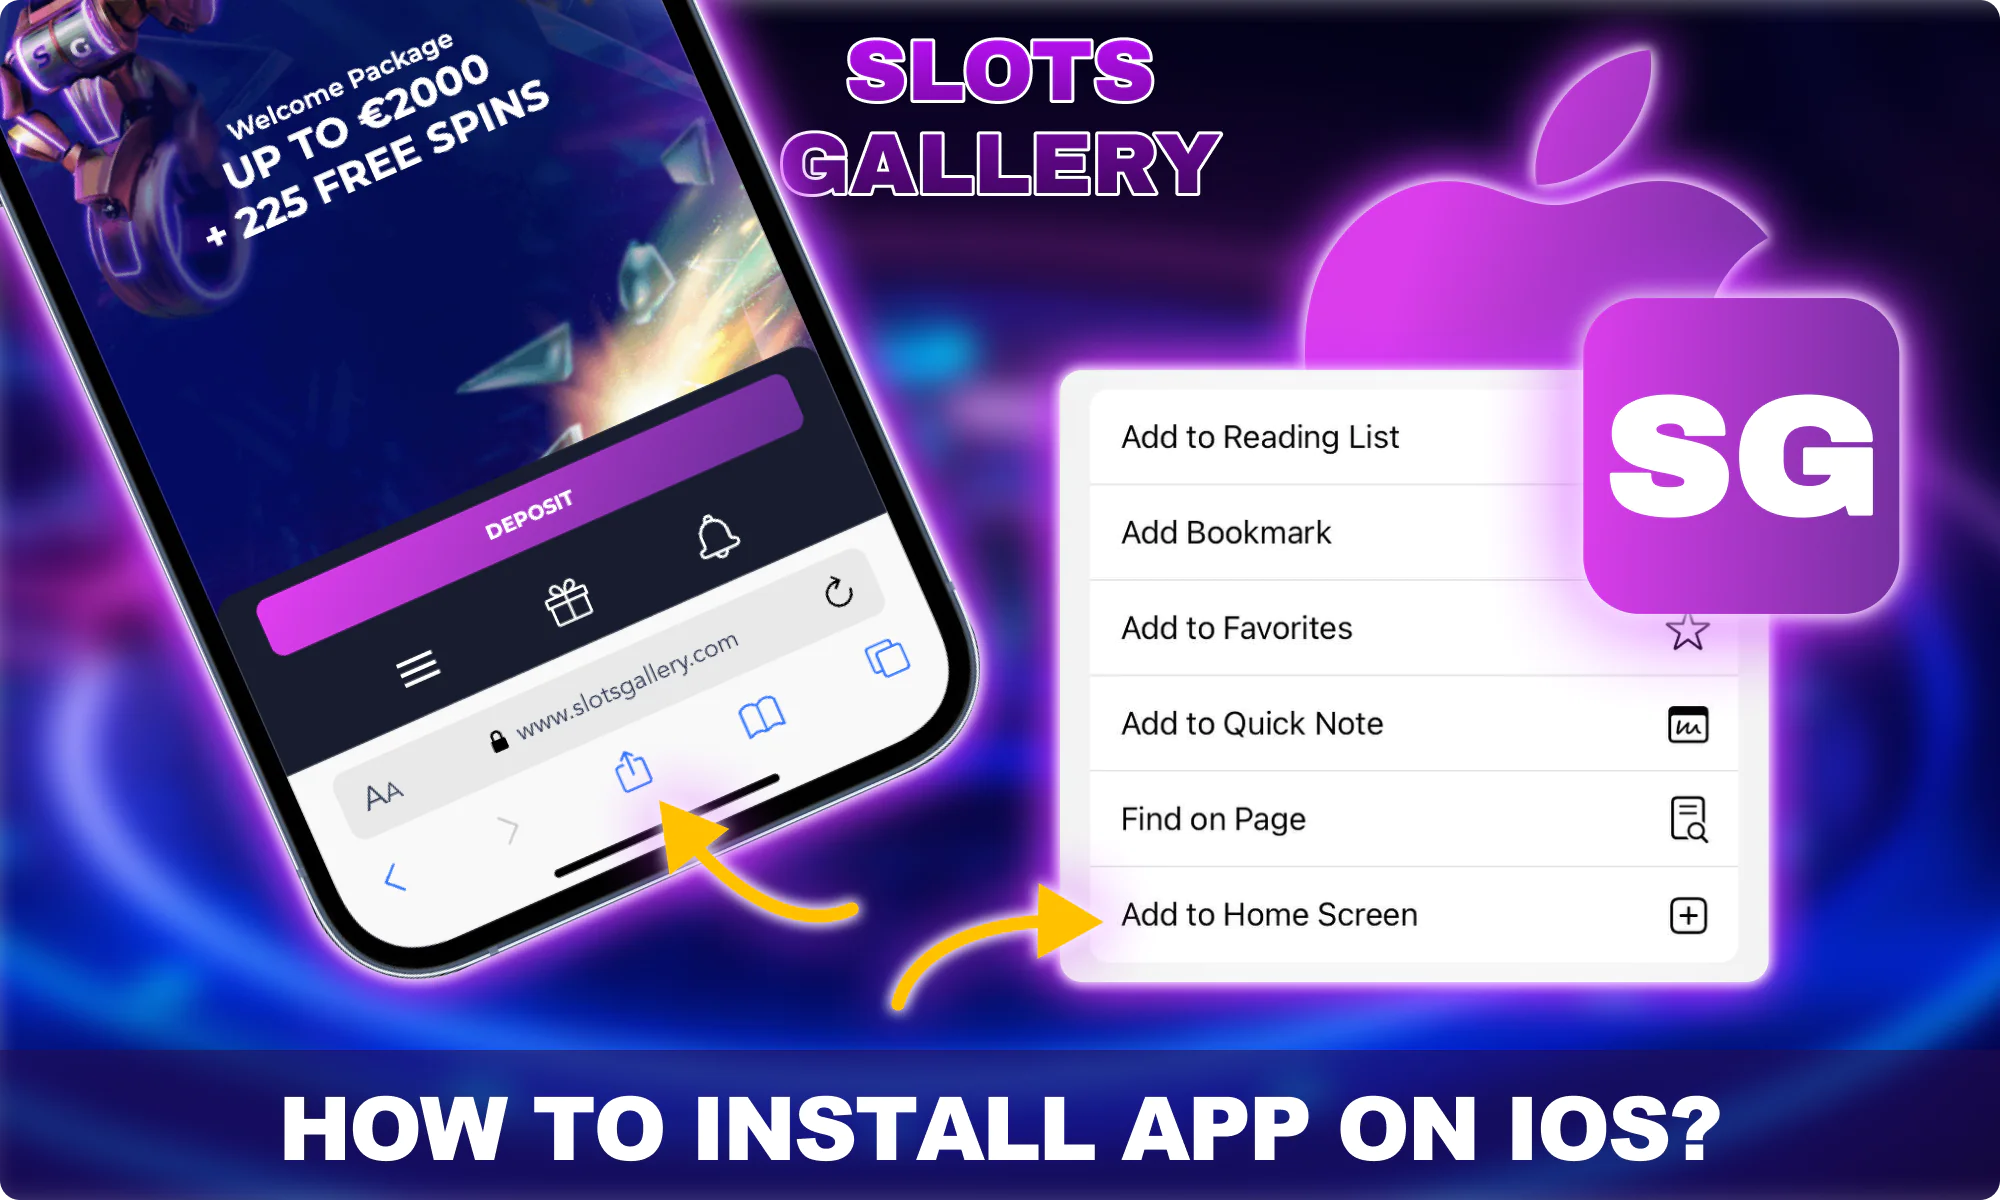 Instruction how to install iOS App - Slots Gallery